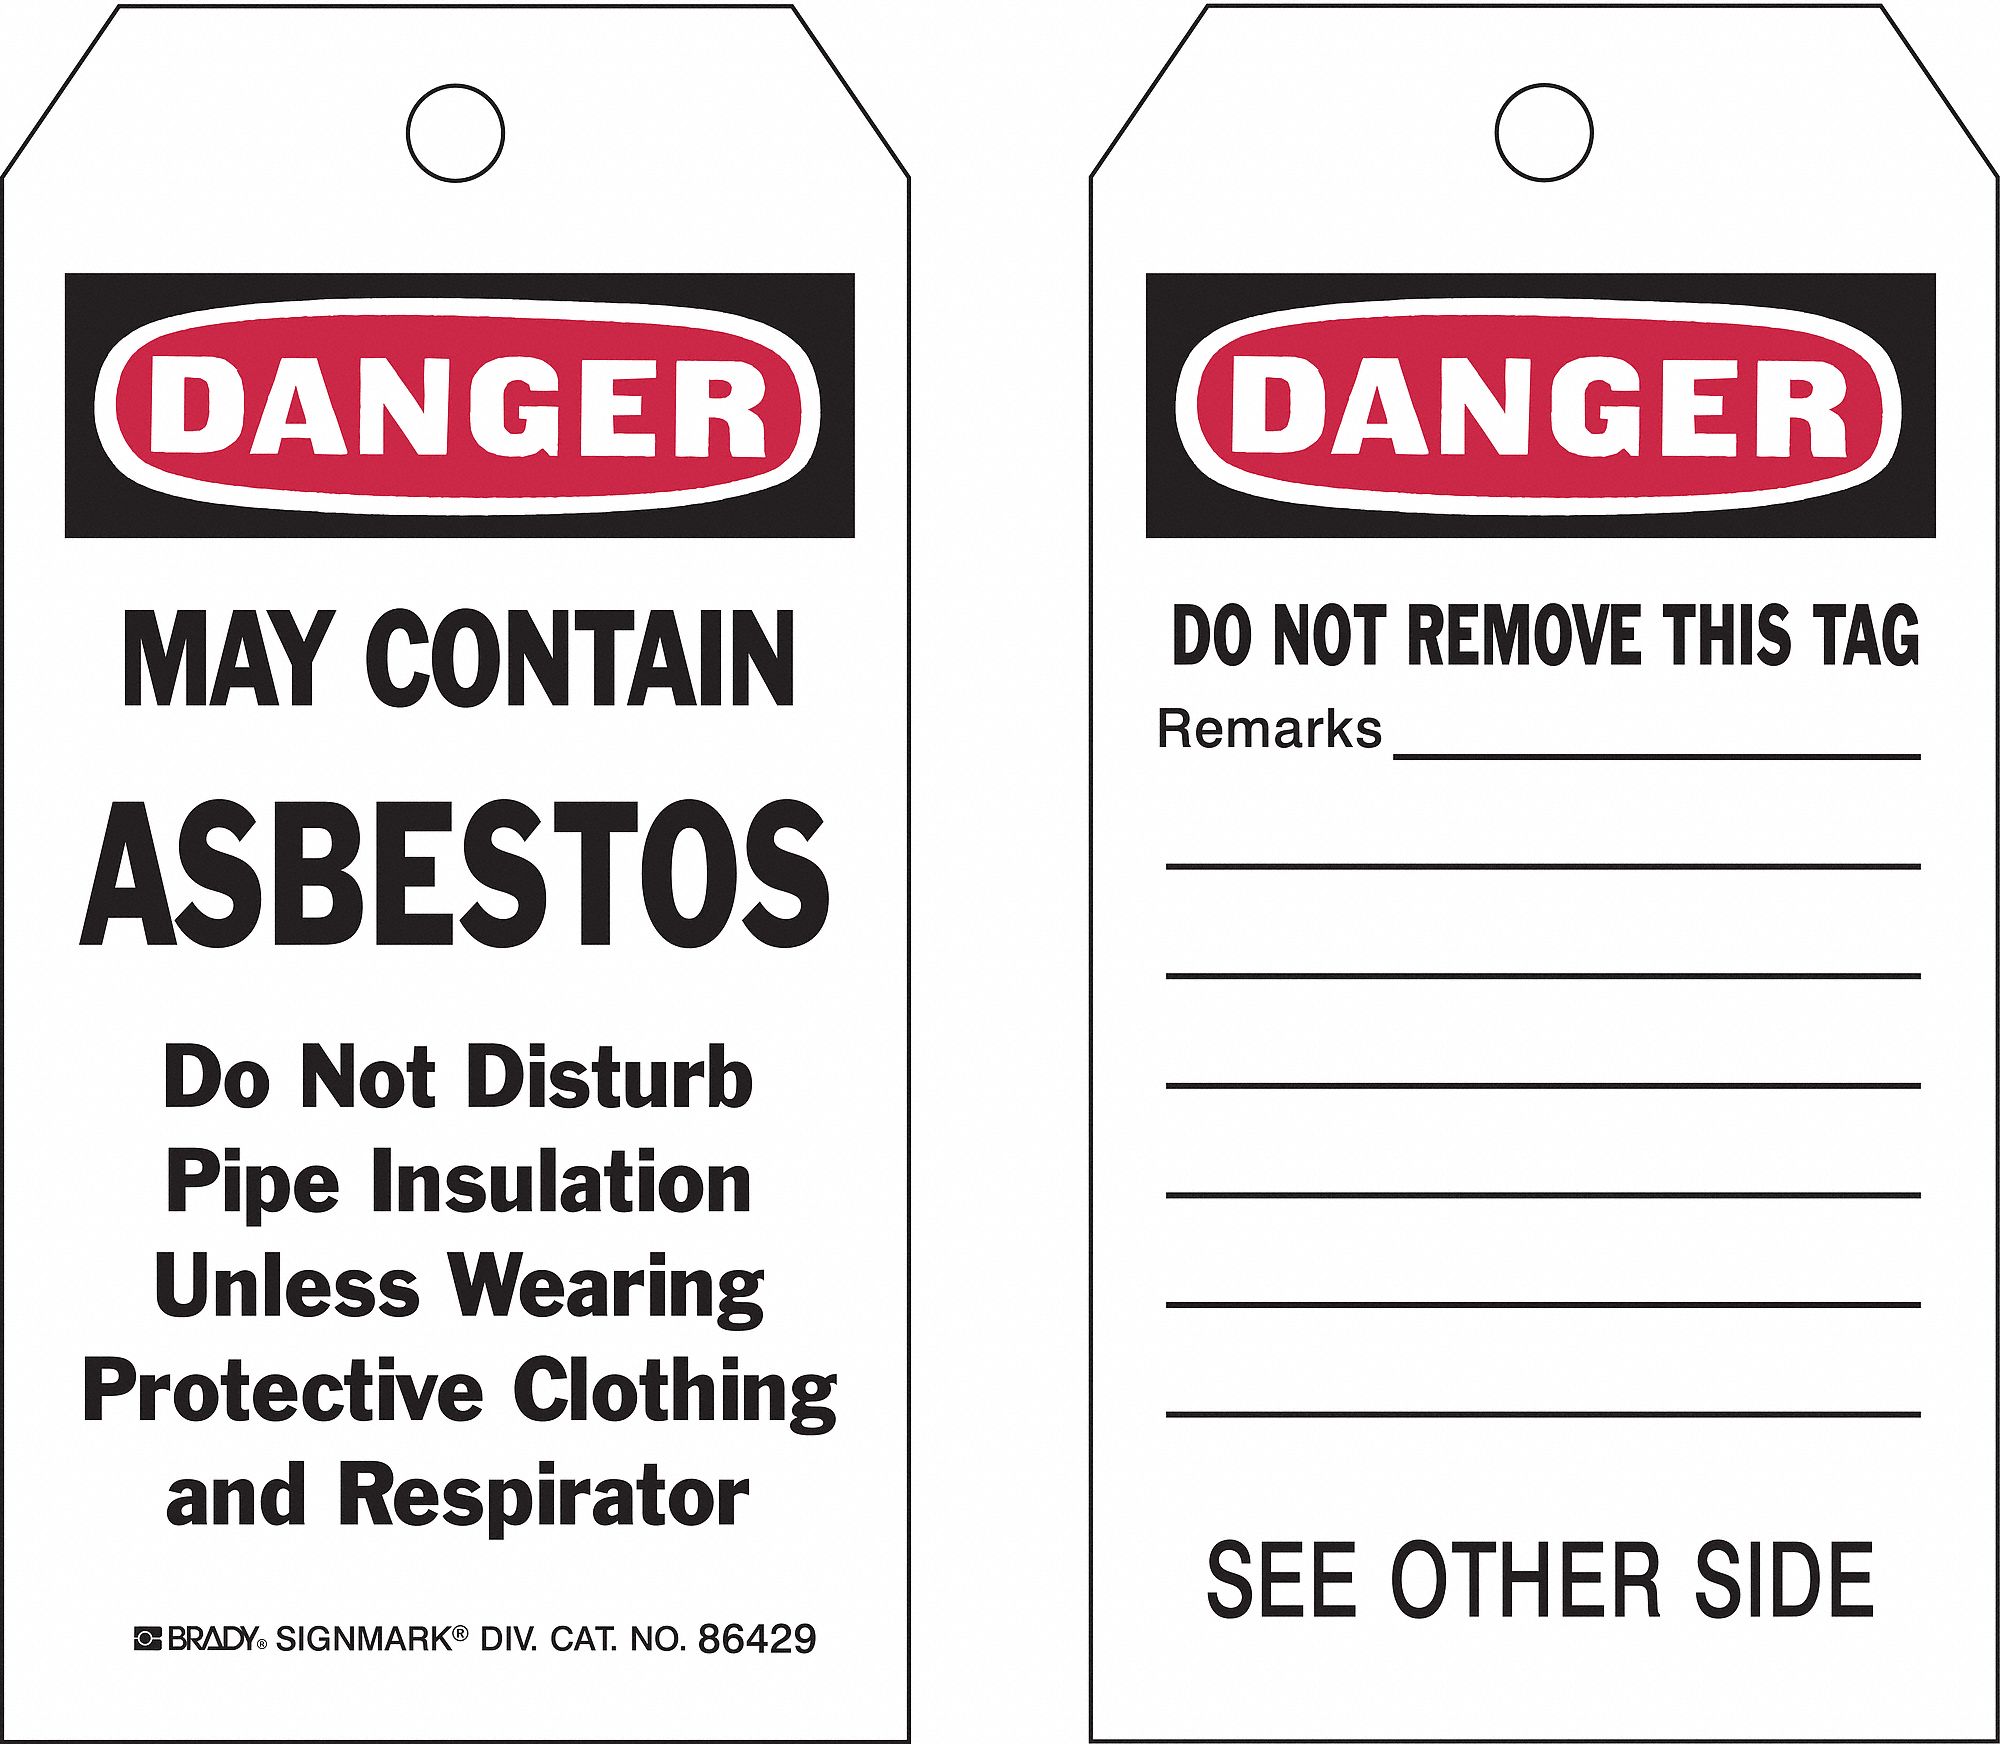 Heavy-Duty PolyesterDanger May Contain Asbestos, Danger Tag 5-1/2